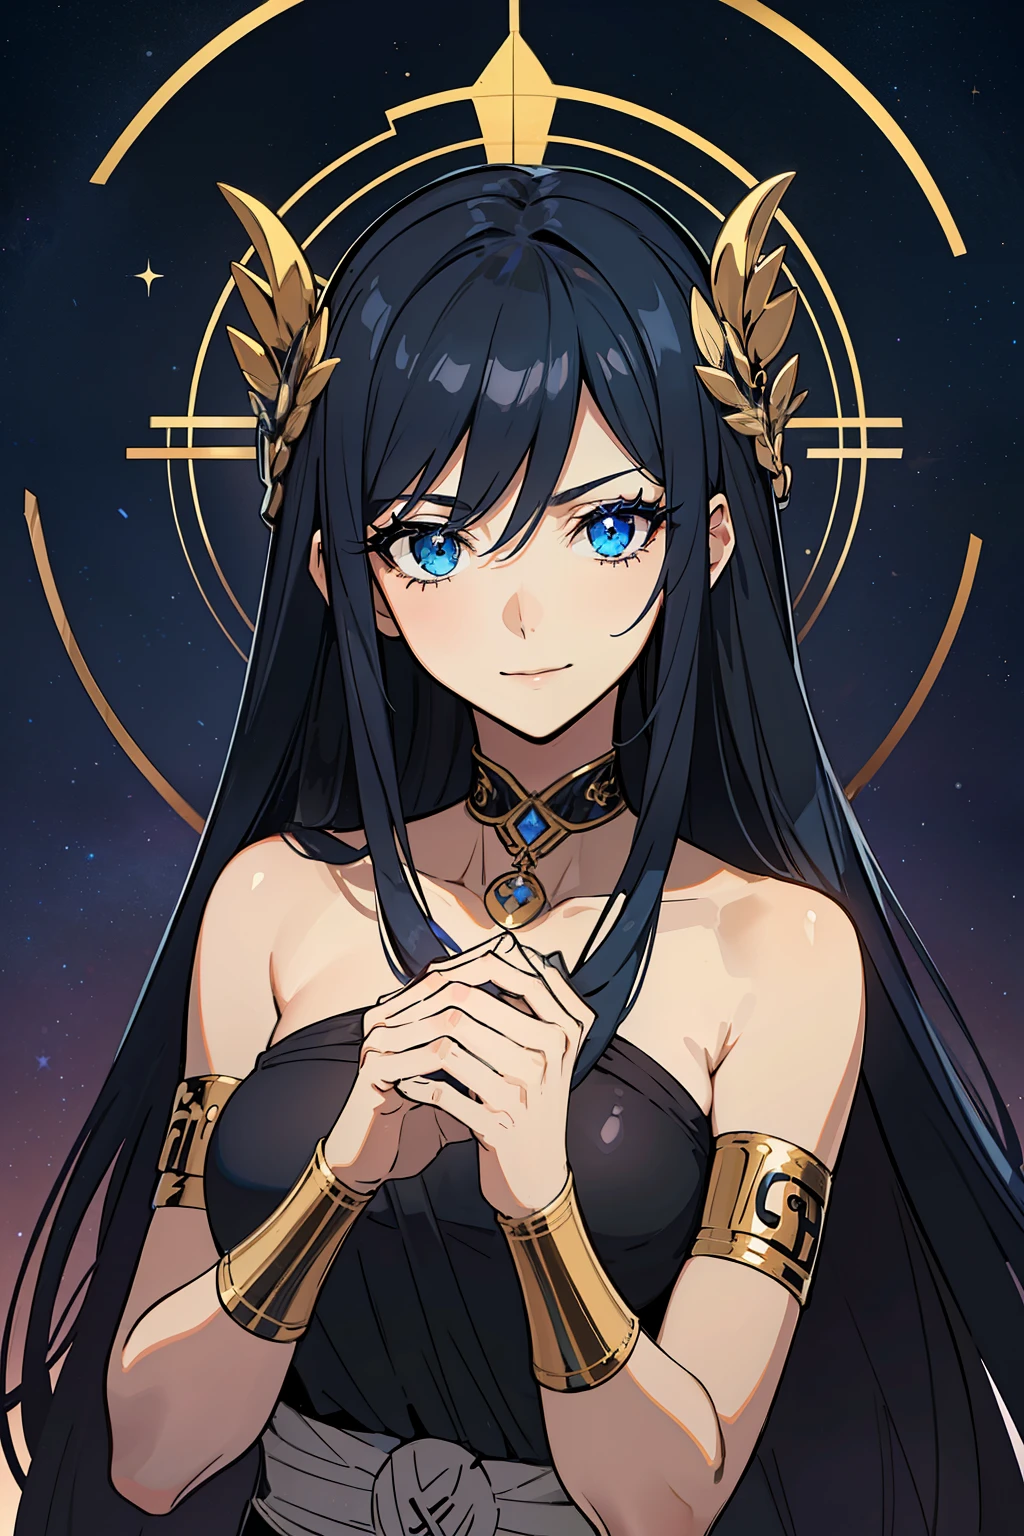 (high-quality, breathtaking),(expressive eyes, perfect face) 1girl, girl, solo, adult, white color hair, glowing hair, constellations on skin, stars in hair, long black dress, sleeveless, armband on left arm, white coloured eyes, byakugan eyes, stylised hair, gentle smile, long length hair, loose hair, side bangs, soft wavey hair, looking at viewer, portrait, ancient greek clothes, blue black and tunic, greek, blue and black sash, darkness inspired background, related to Nyx, elegent, regal, beautiful, a shaul of darkness decorated with stars, Greek Myth, soft make up, cosmos, starlight, goddess of the night, holding skull in hand
